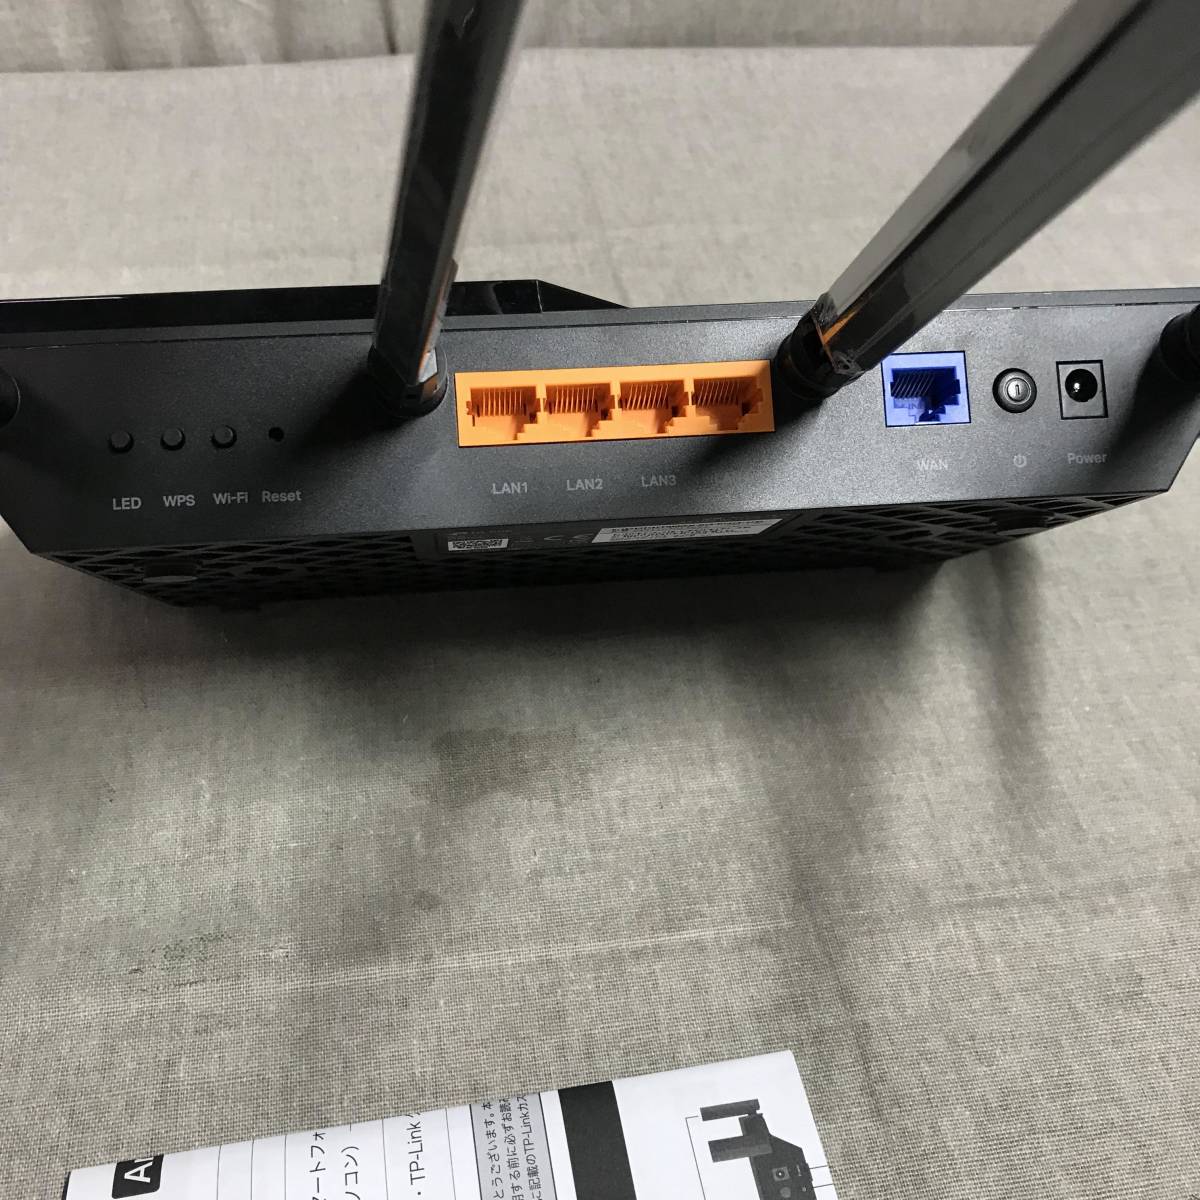 TP-Link WiFi ルーター WiFi6 PS5 対応 無線LAN 11ax AX5400 4804 Mbps (5 GHz) 574  Mbps (2.4 GHz) OneMesh対応 Archer AX73/A product details Proxy bidding and  ordering service for auctions and